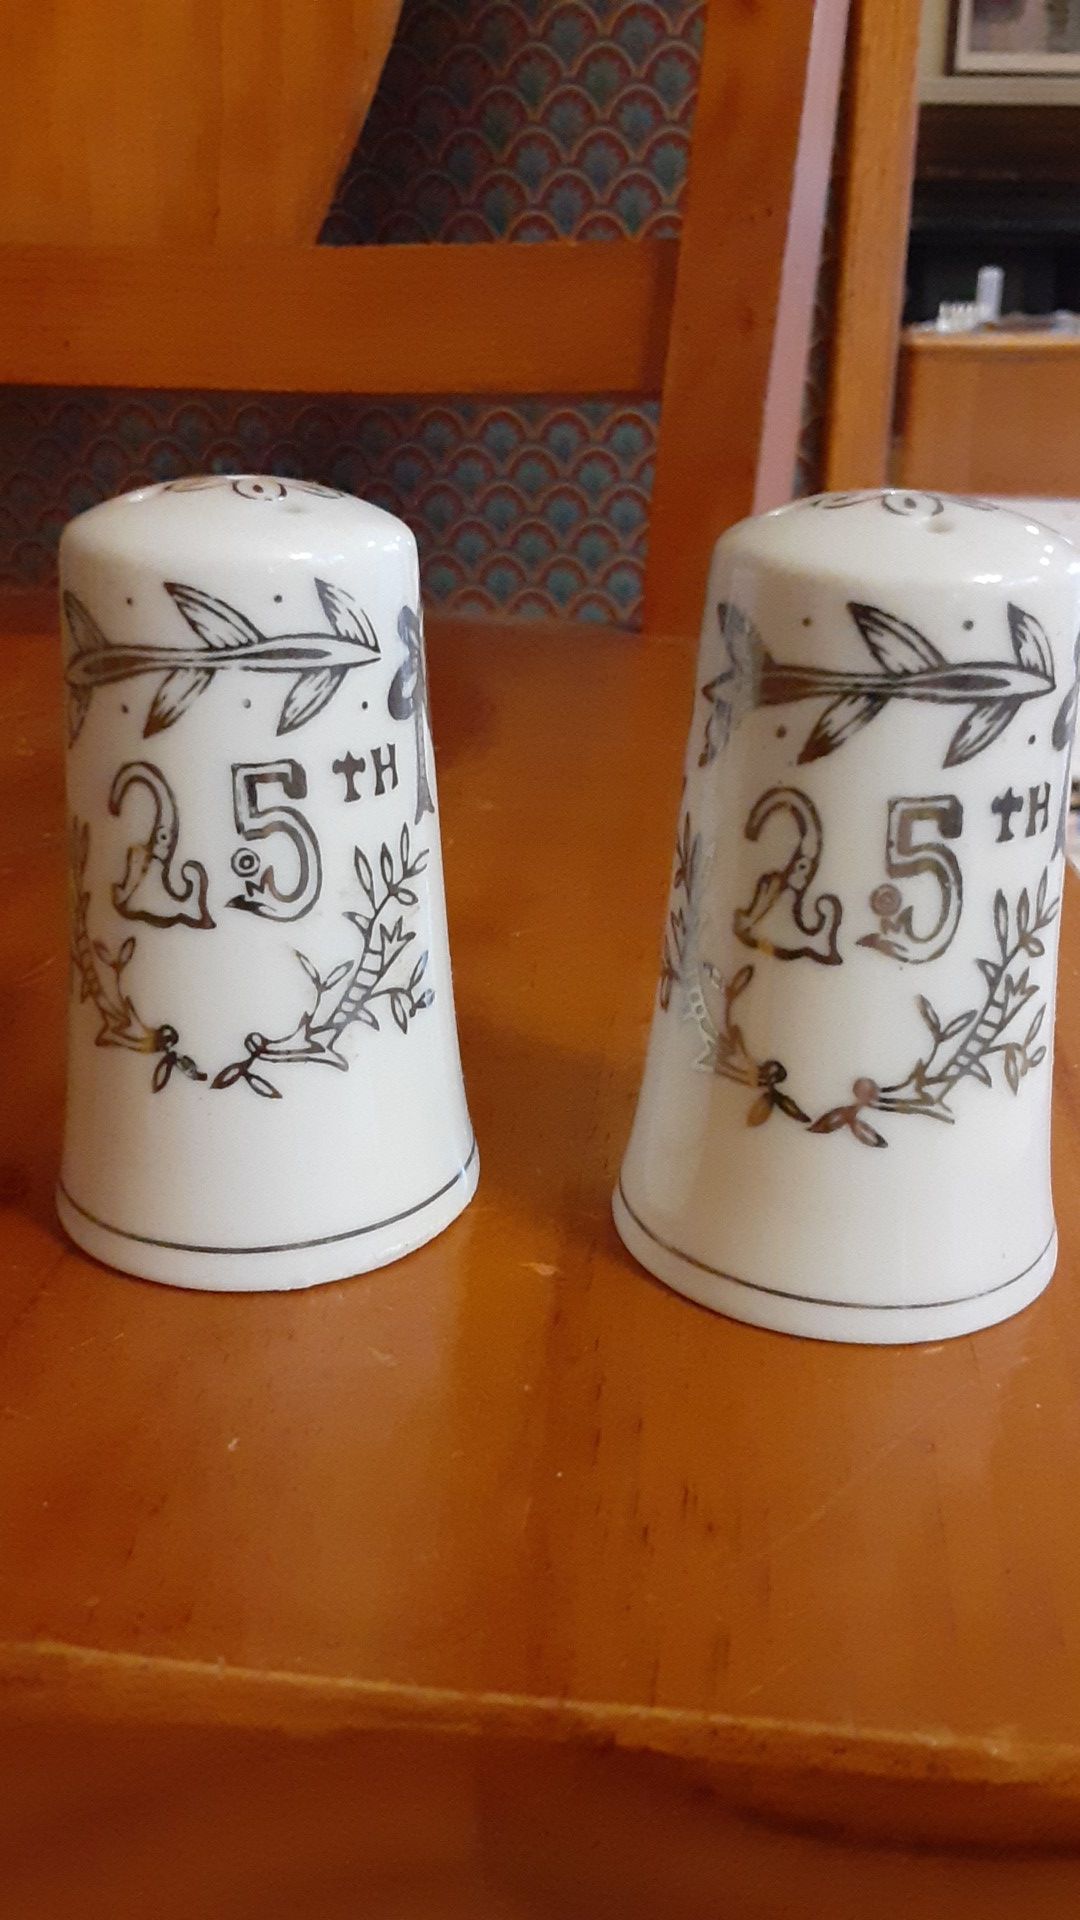 25th Wedding Anniversary Salt and Pepper Shakers